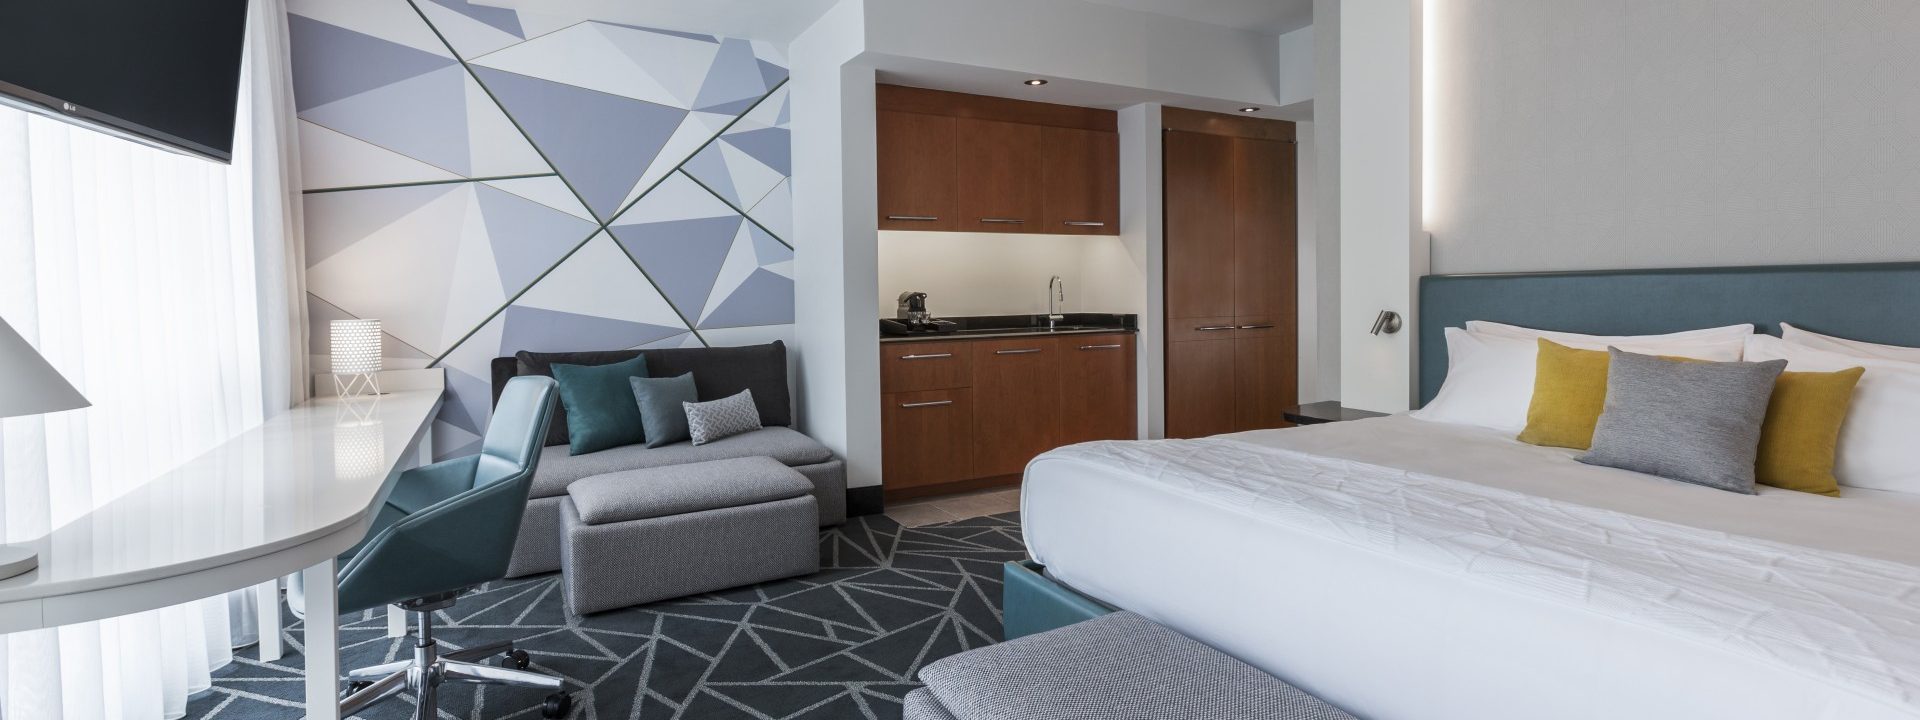 Hôtel le Crystal, a hotel-condo hybrid, shimmers in Montreal’s chic Golden Mile neighborhood